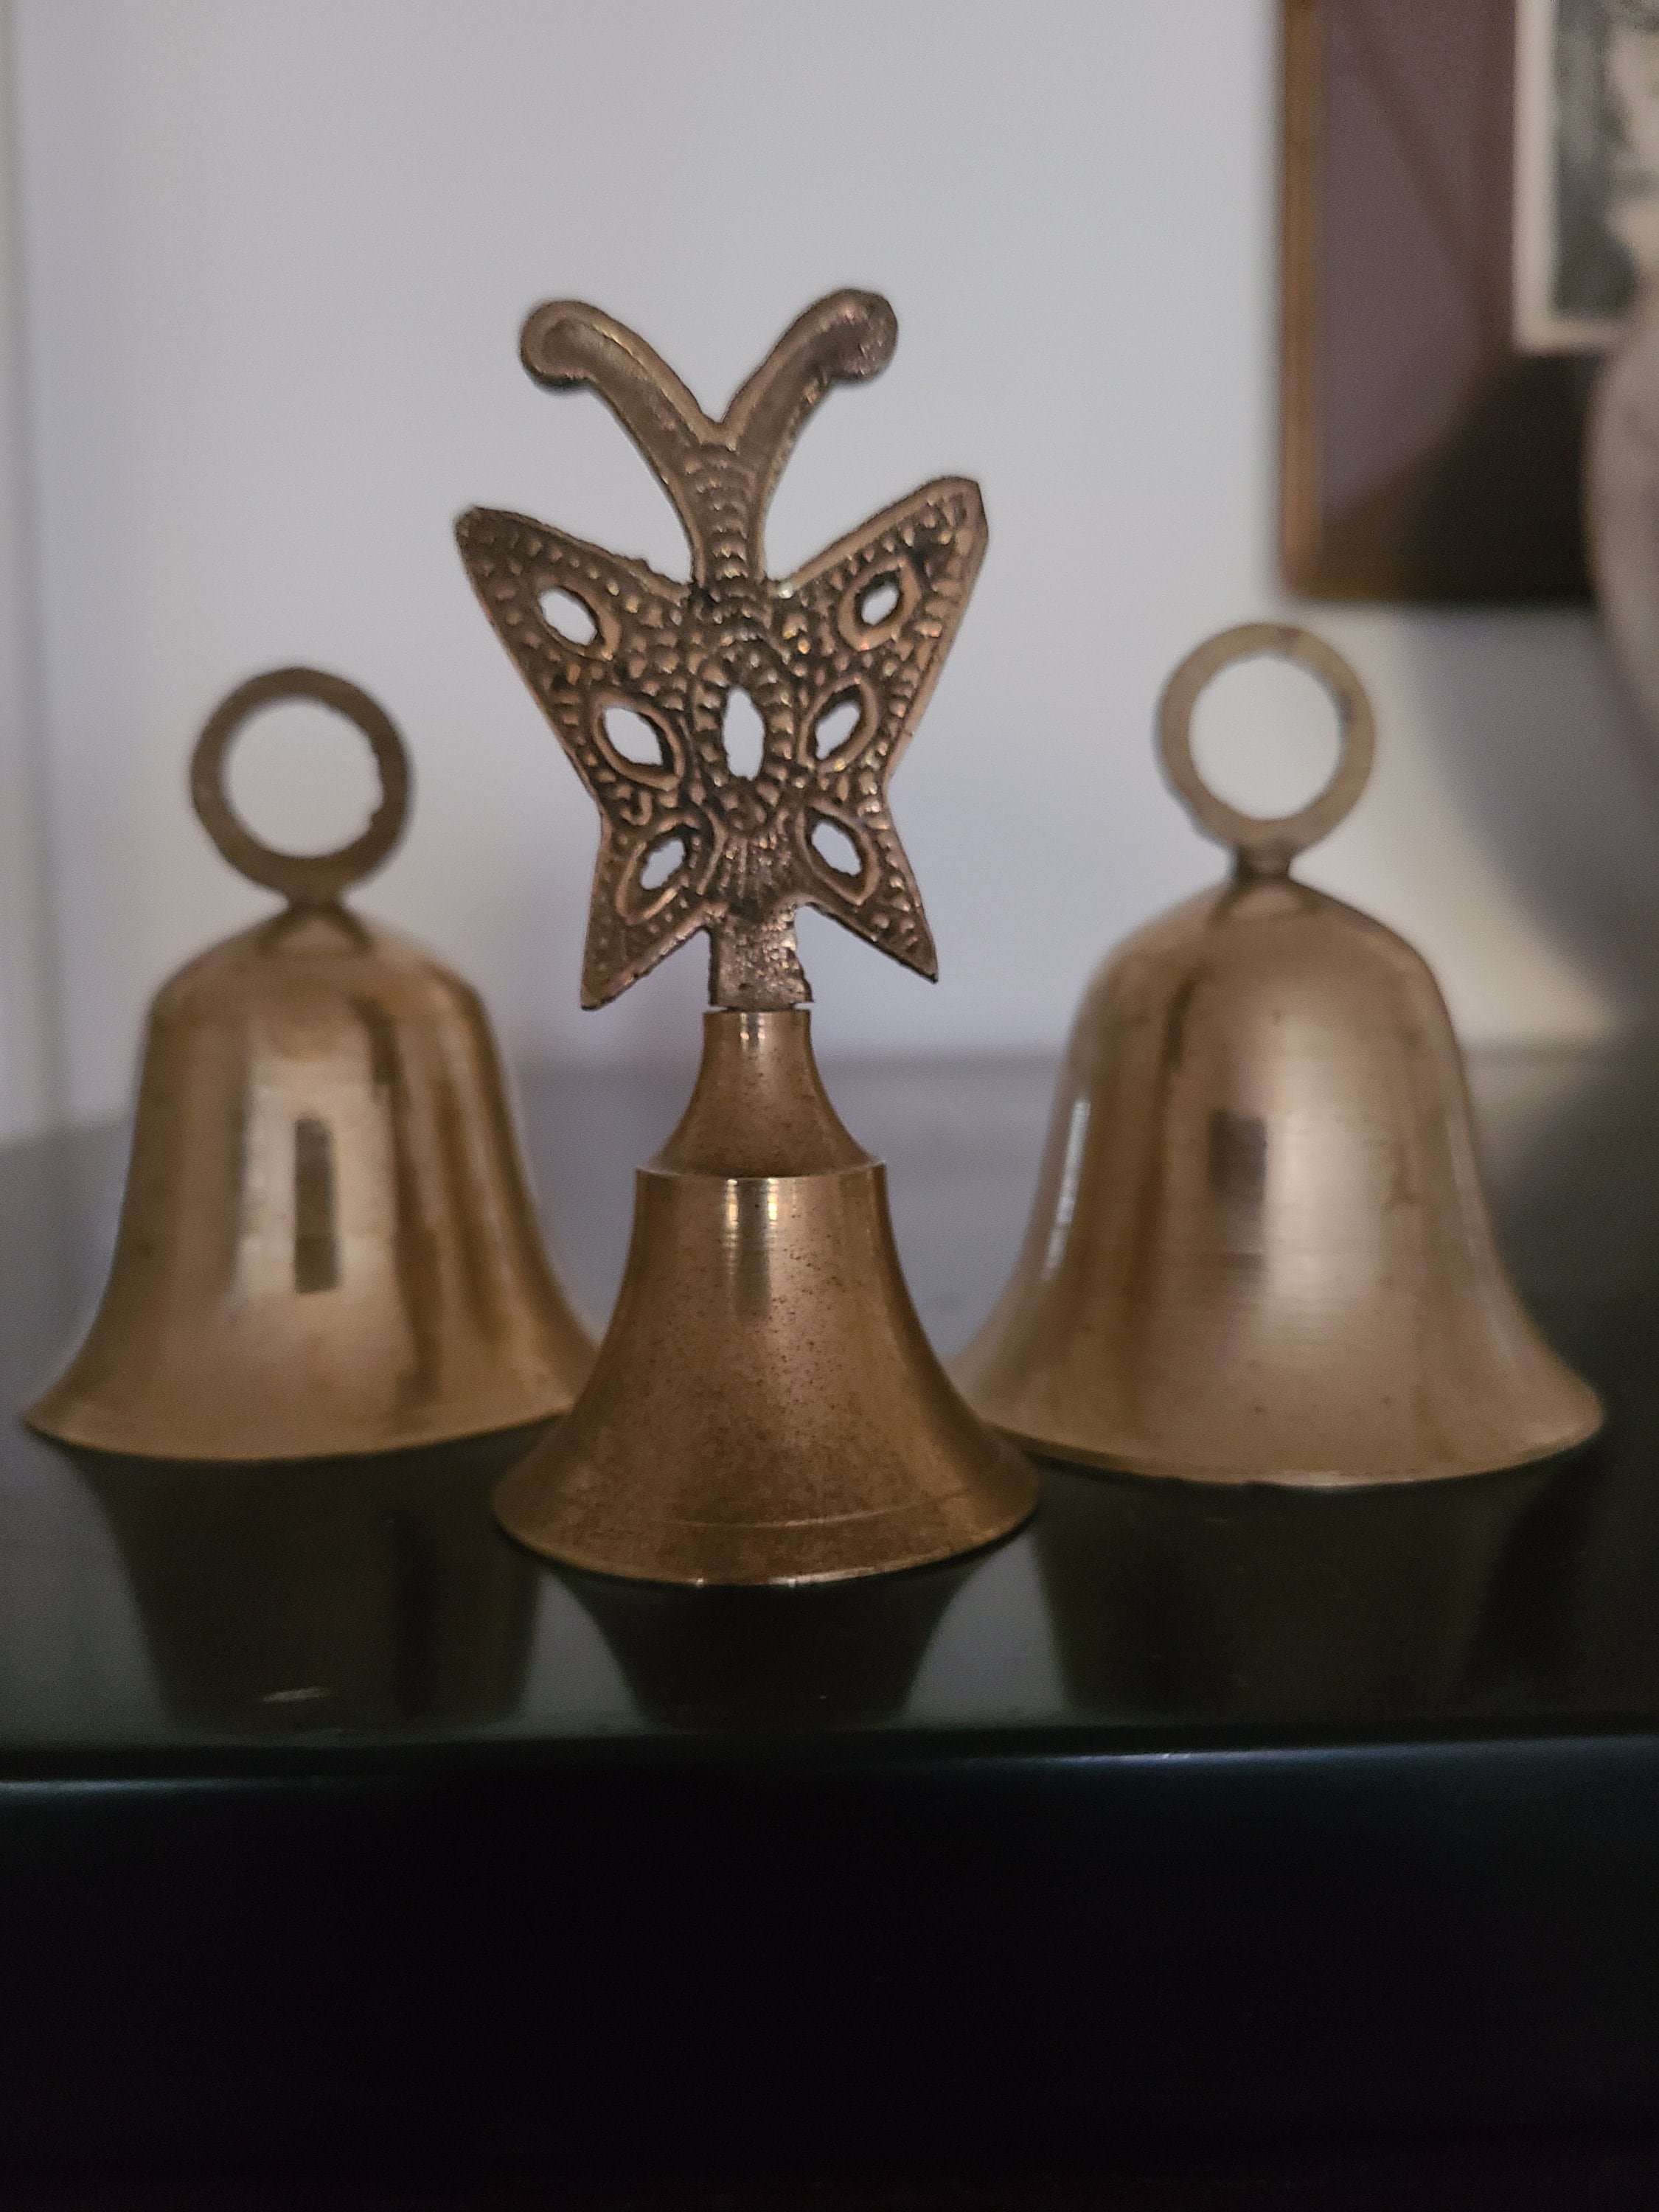 Collection of 6 Medium Size Brass Bells/perfect Wedding Accents/bright  Variety of Tones 